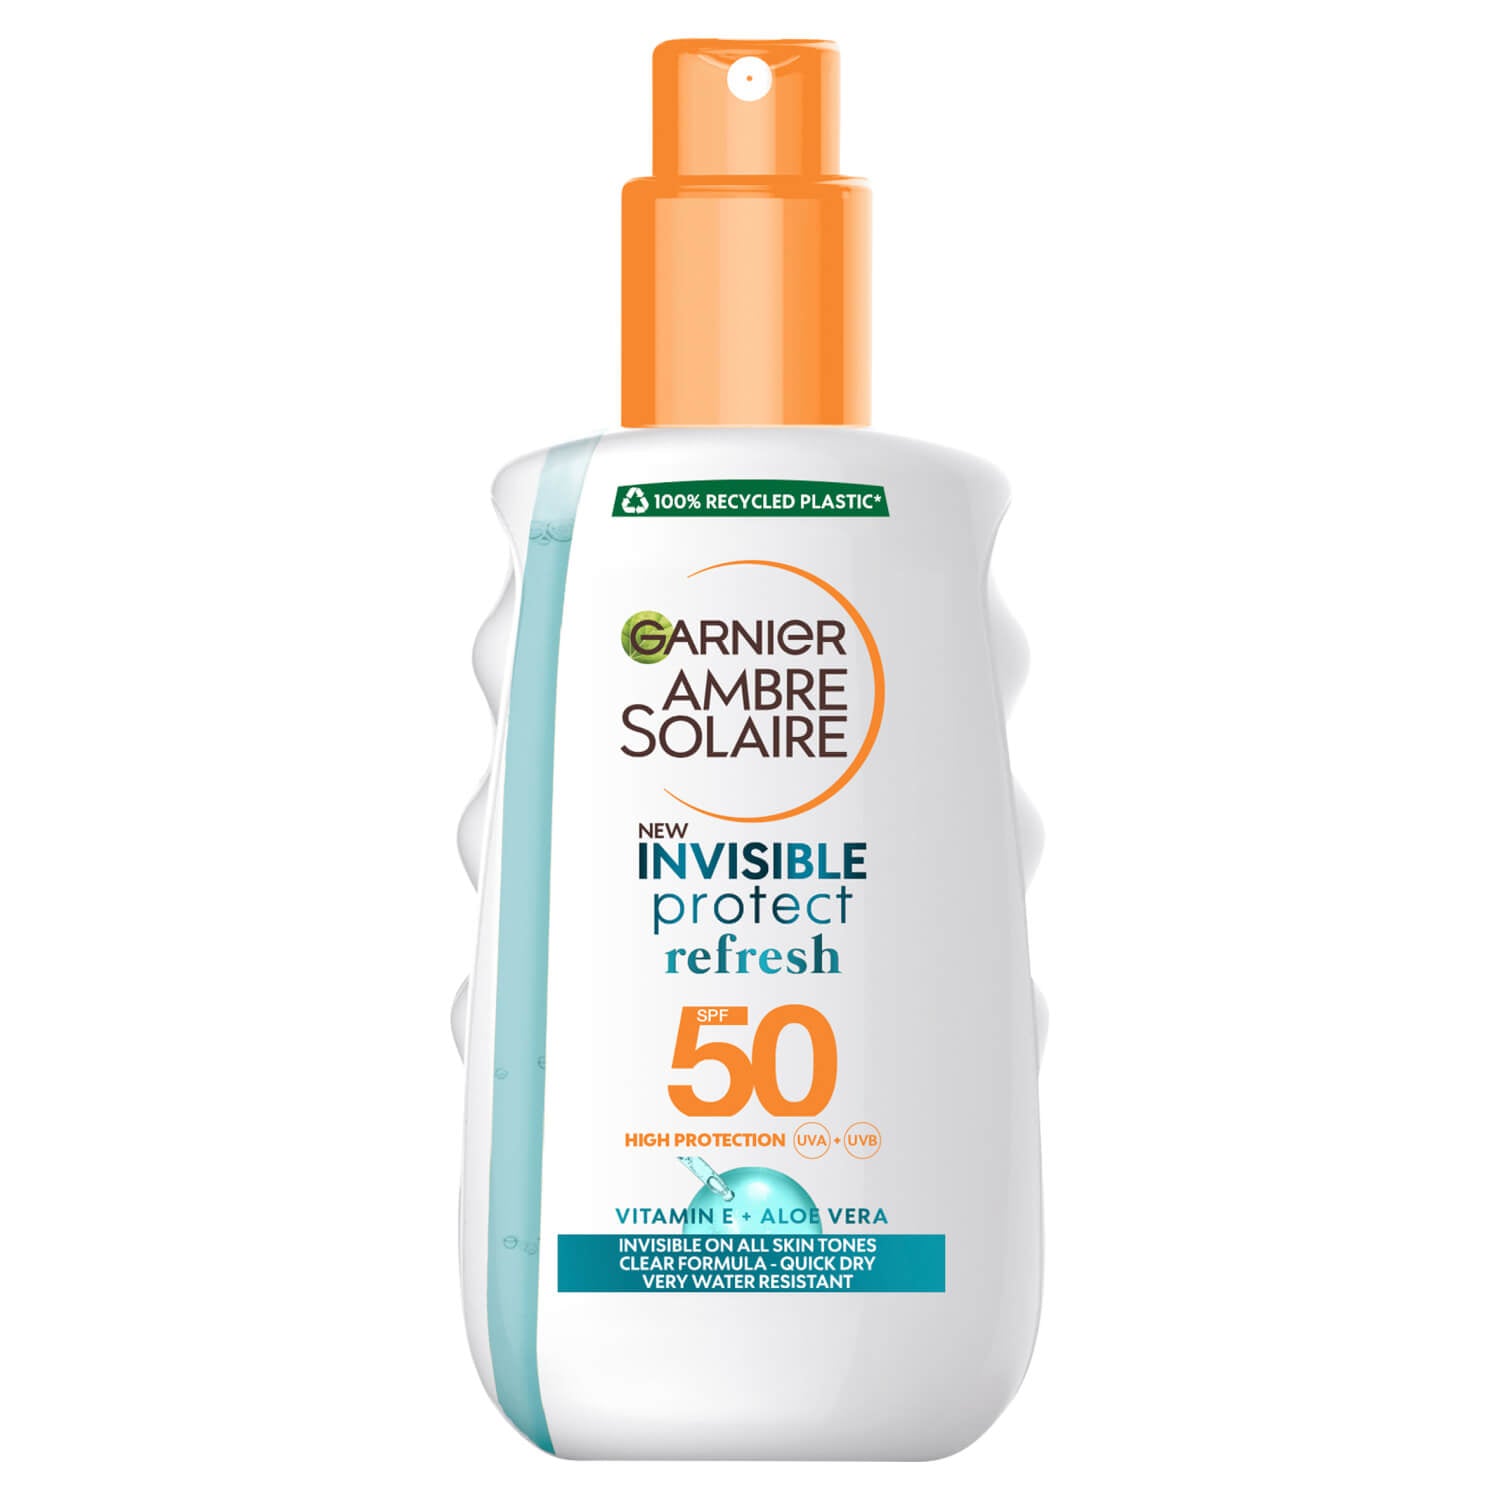 Garnier Ambre Solaire Invisible Protect Refresh Spray SPF50 - 200ml 1 Shaws Department Stores